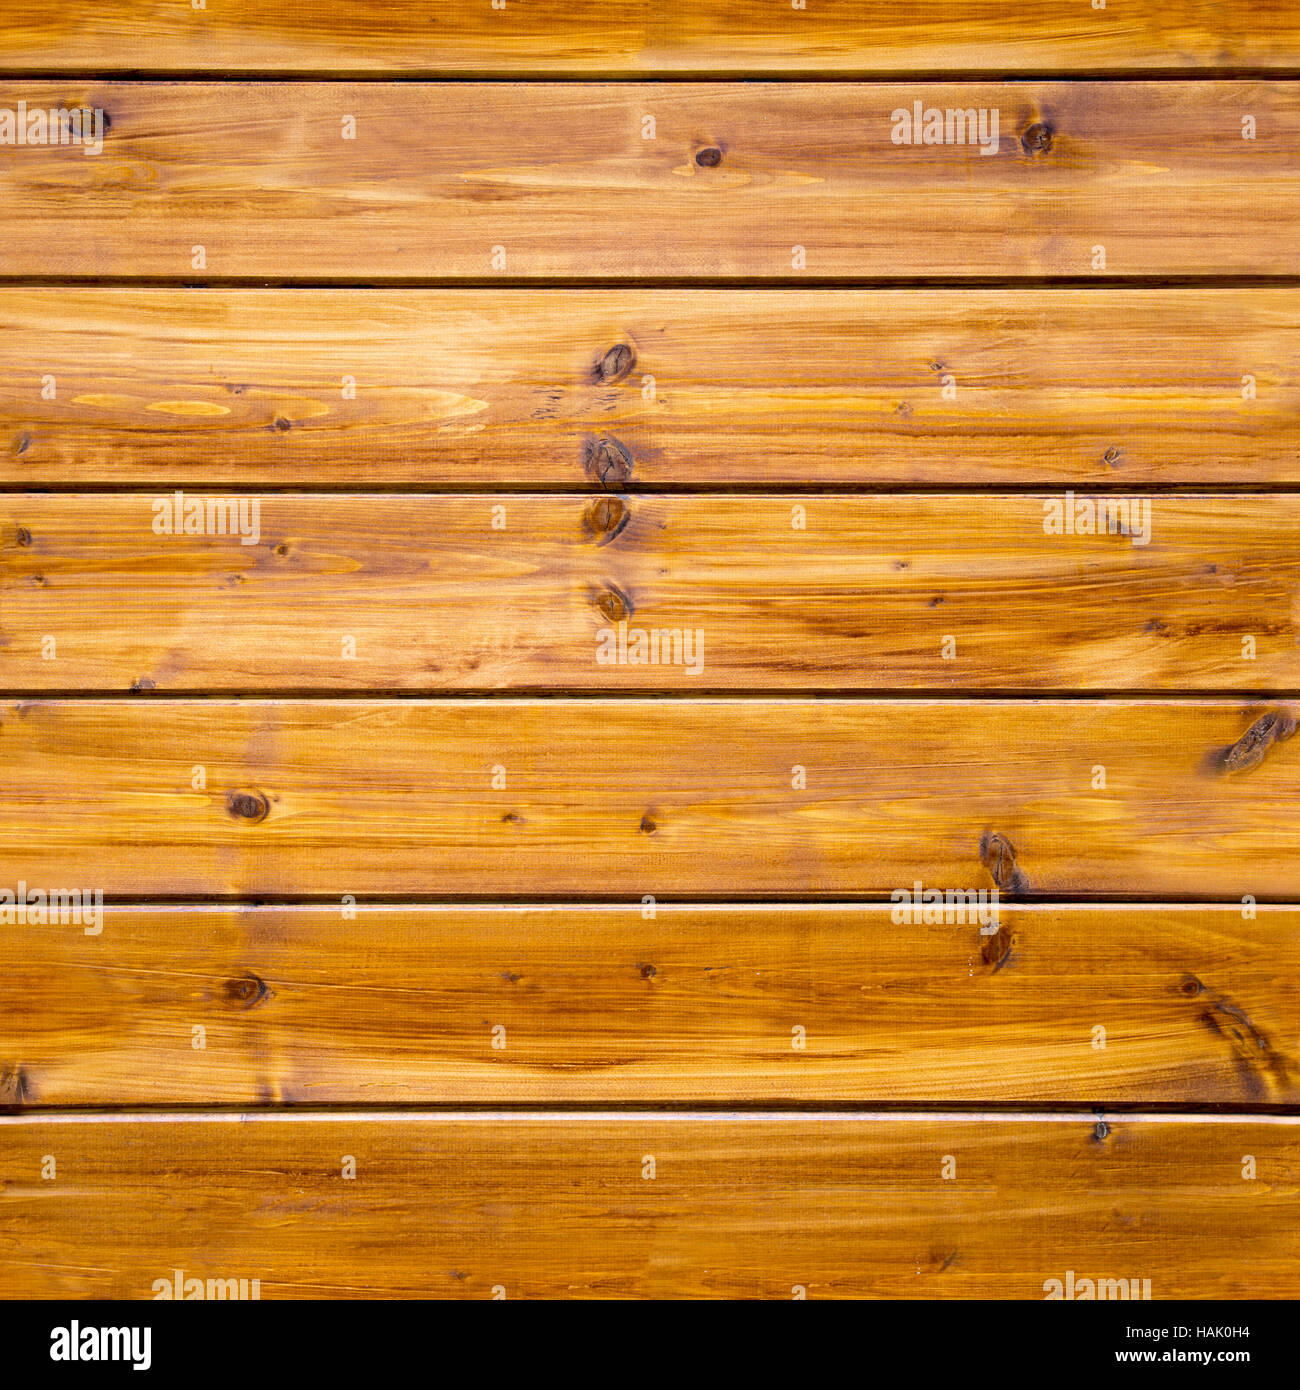 seamless background of brown wooden planks Stock Photo